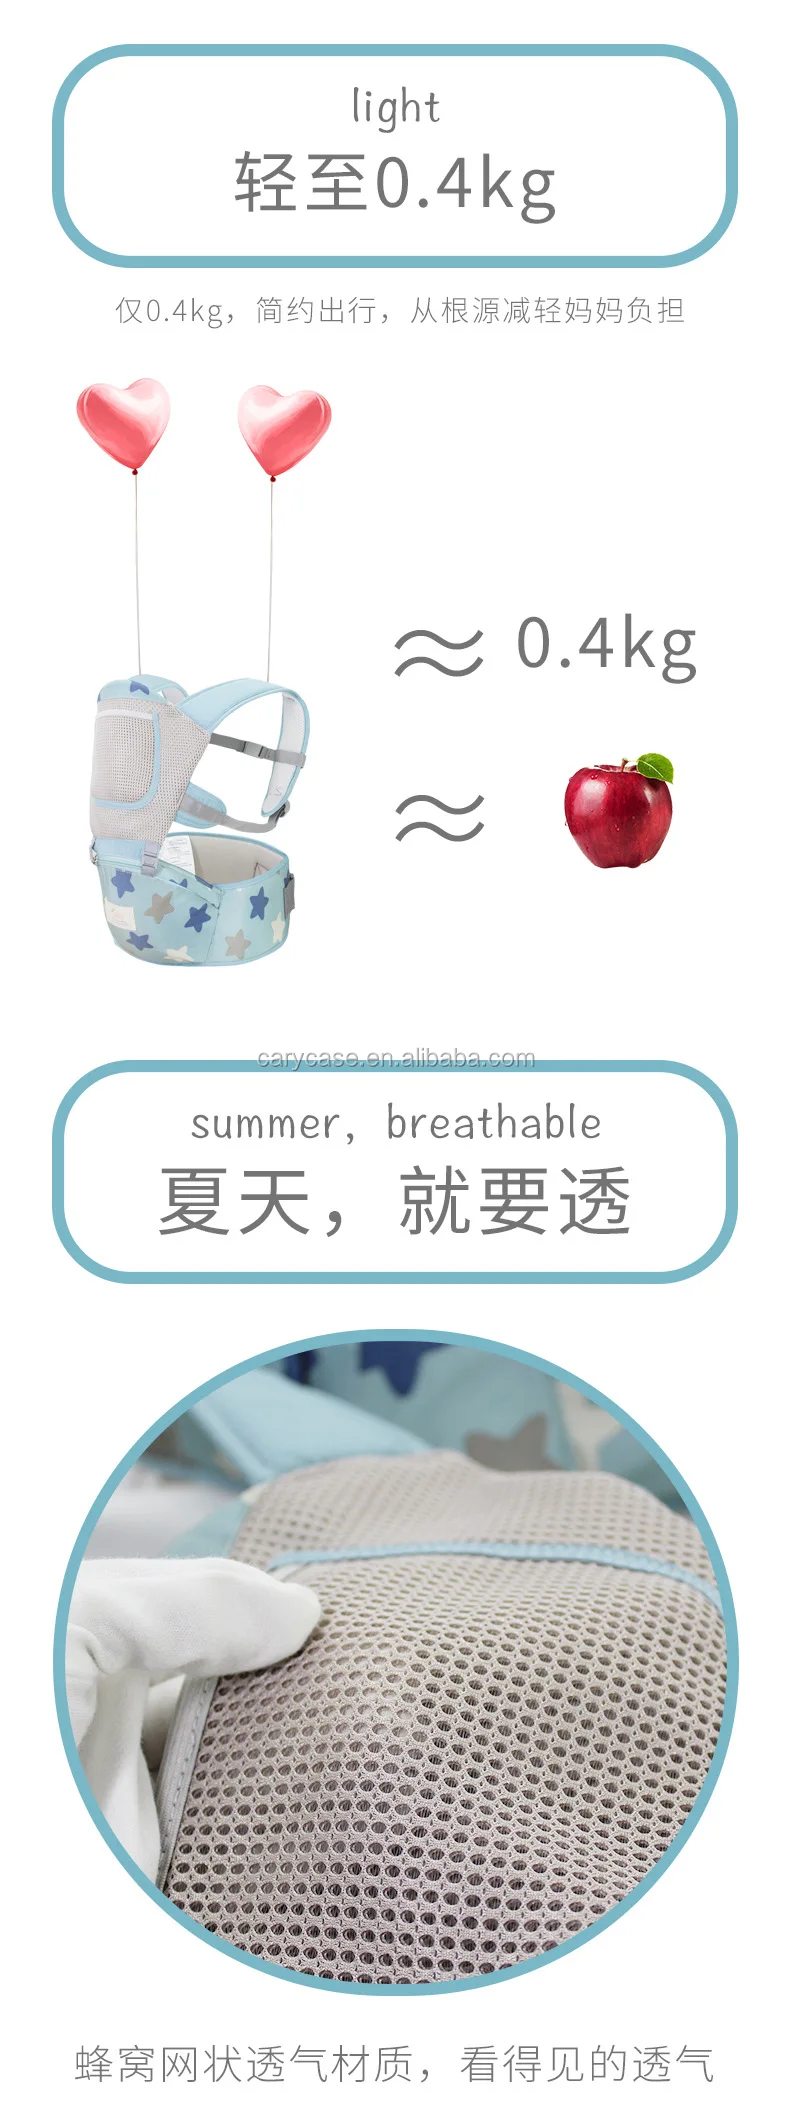 imama four seasons universal summer breathable style hold baby waist stool baby strap baby belt,0.4kg only